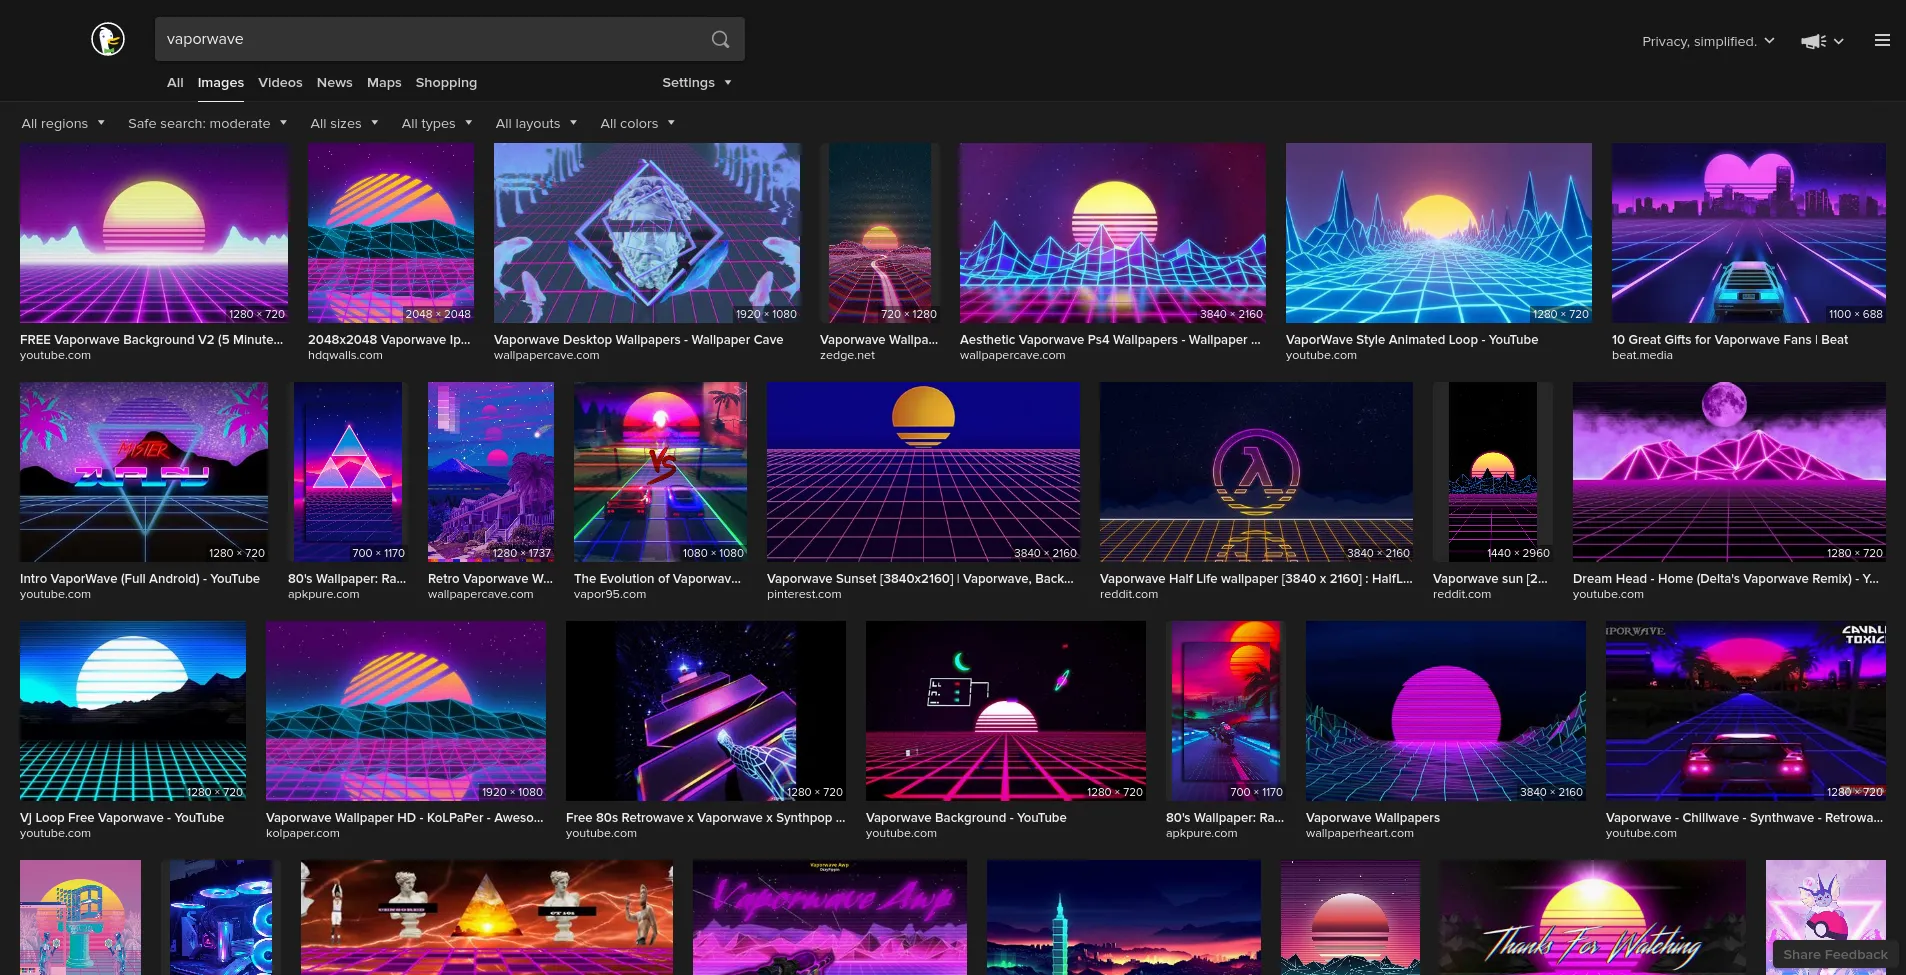 vaporwave-search-results.png